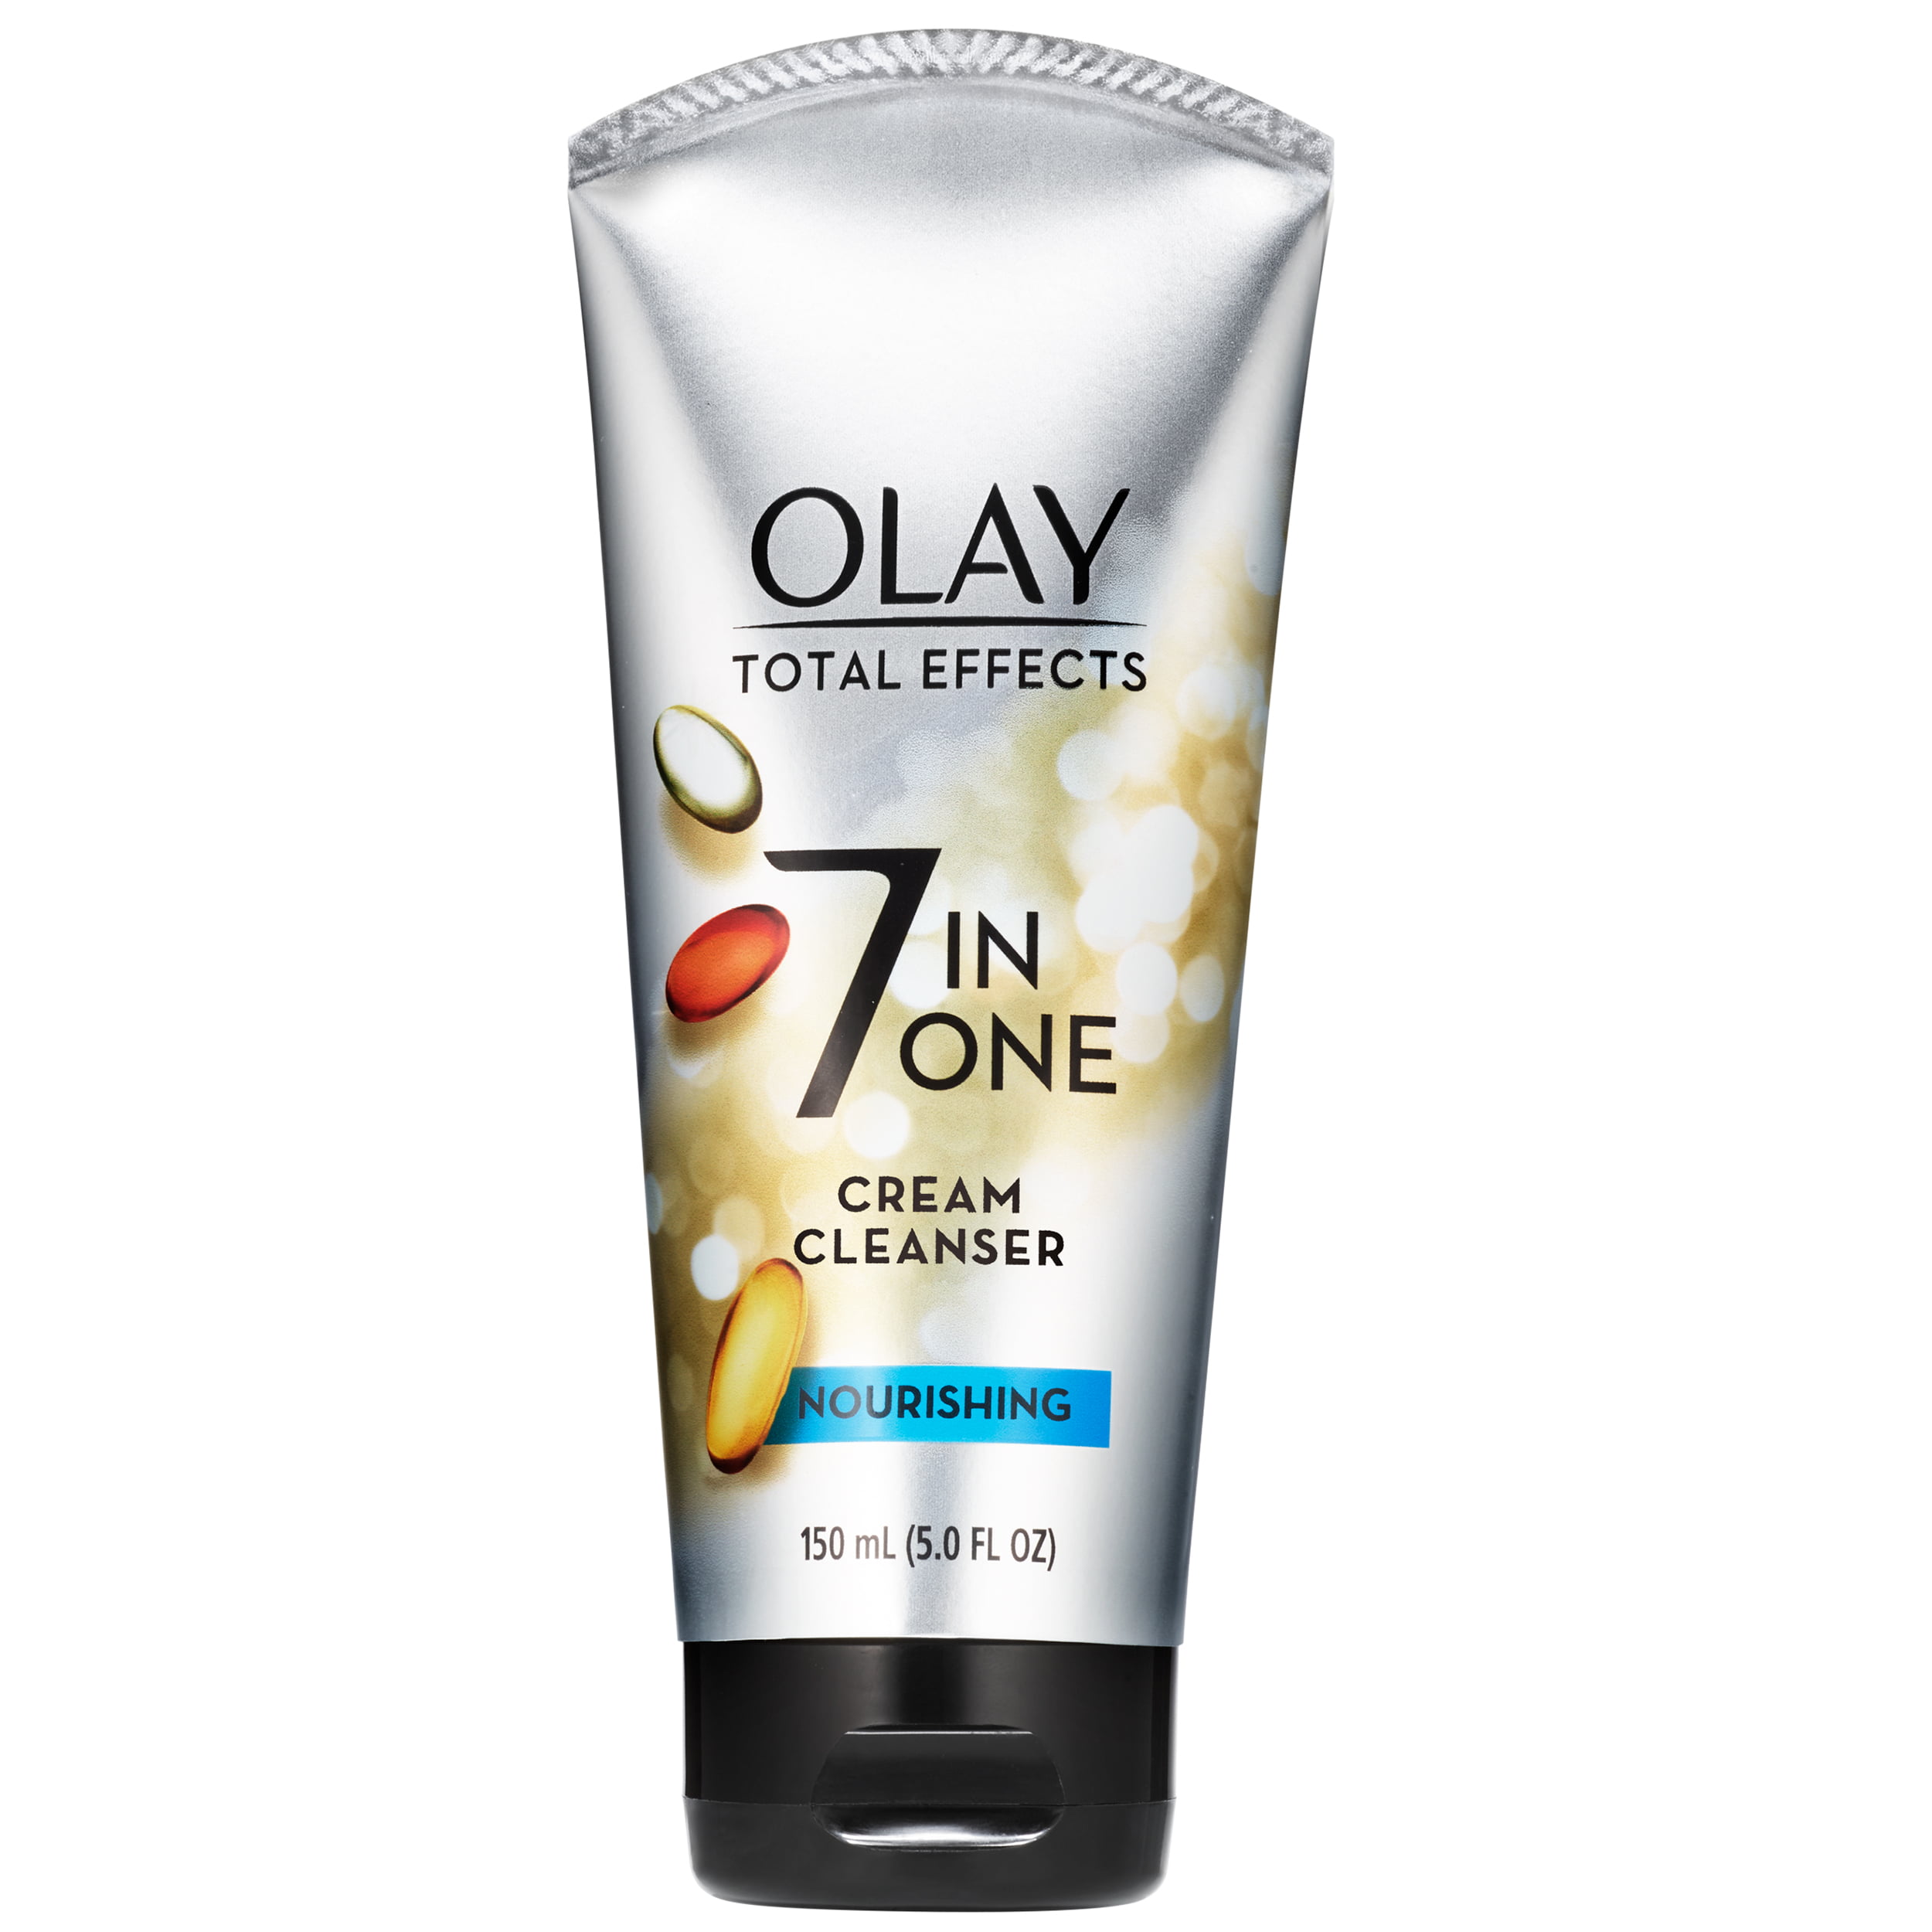 Olay Total Effects Face Wash, 7 in 1 Nourish Cream Cleanser, 5 fl oz